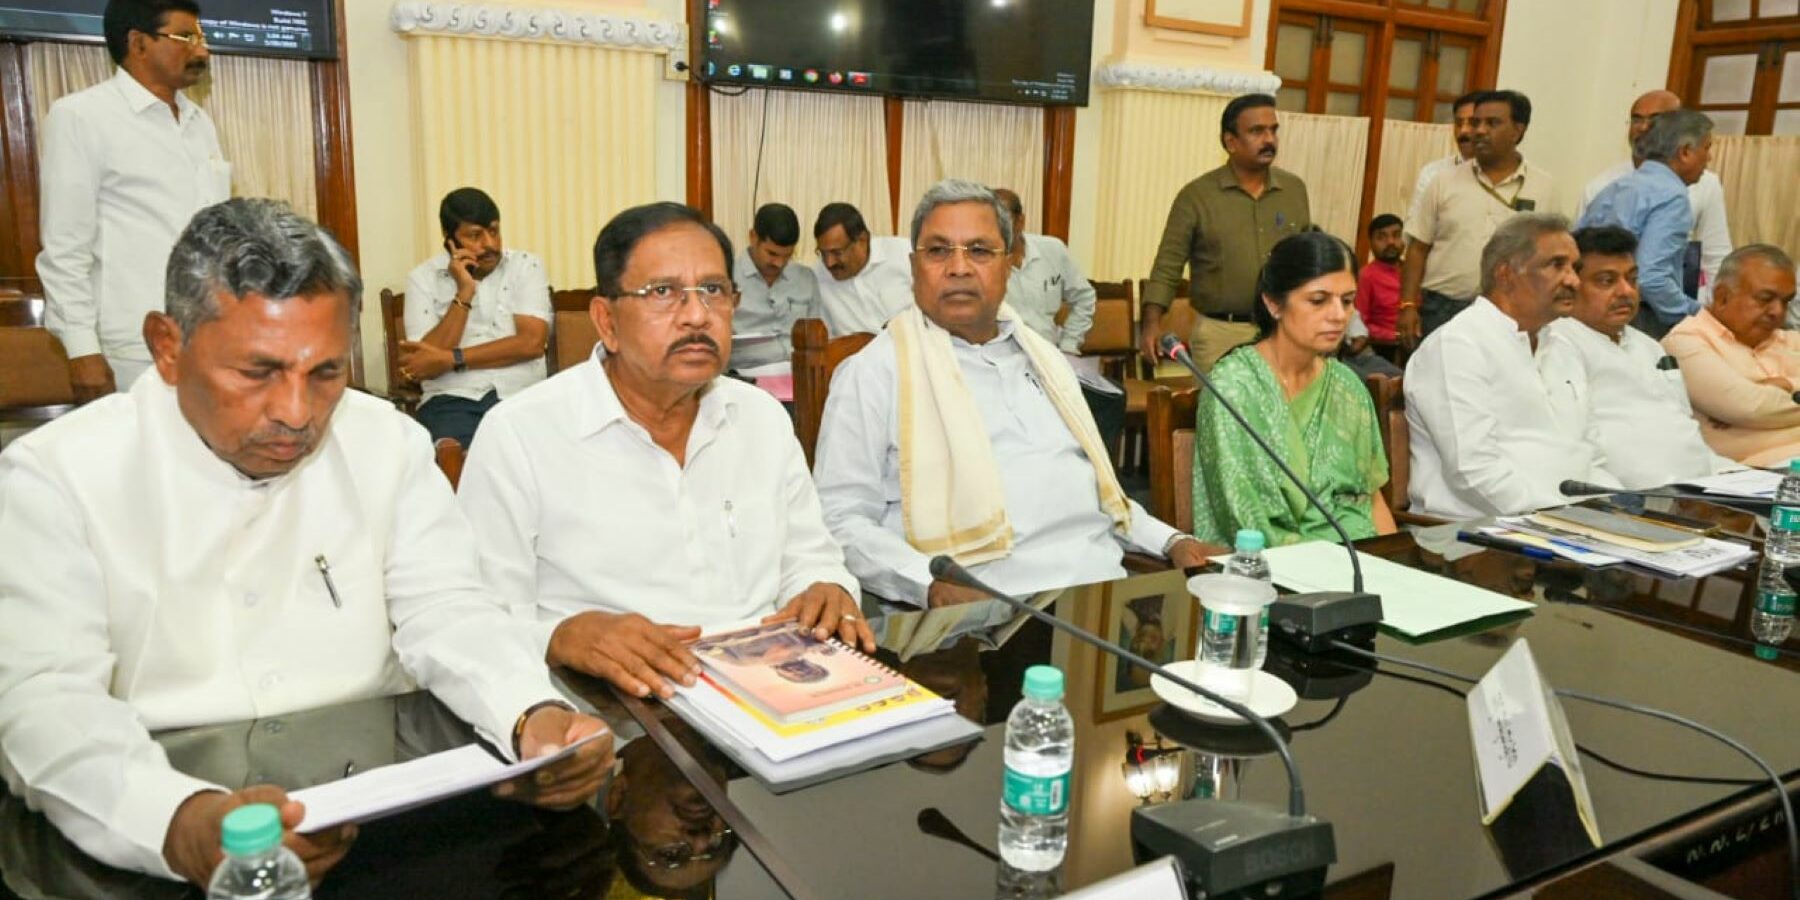 Chief Minister Siddaramaiah chaired the Cabinet meeting at Vidhana Soudha on 10 August. (Supplied)